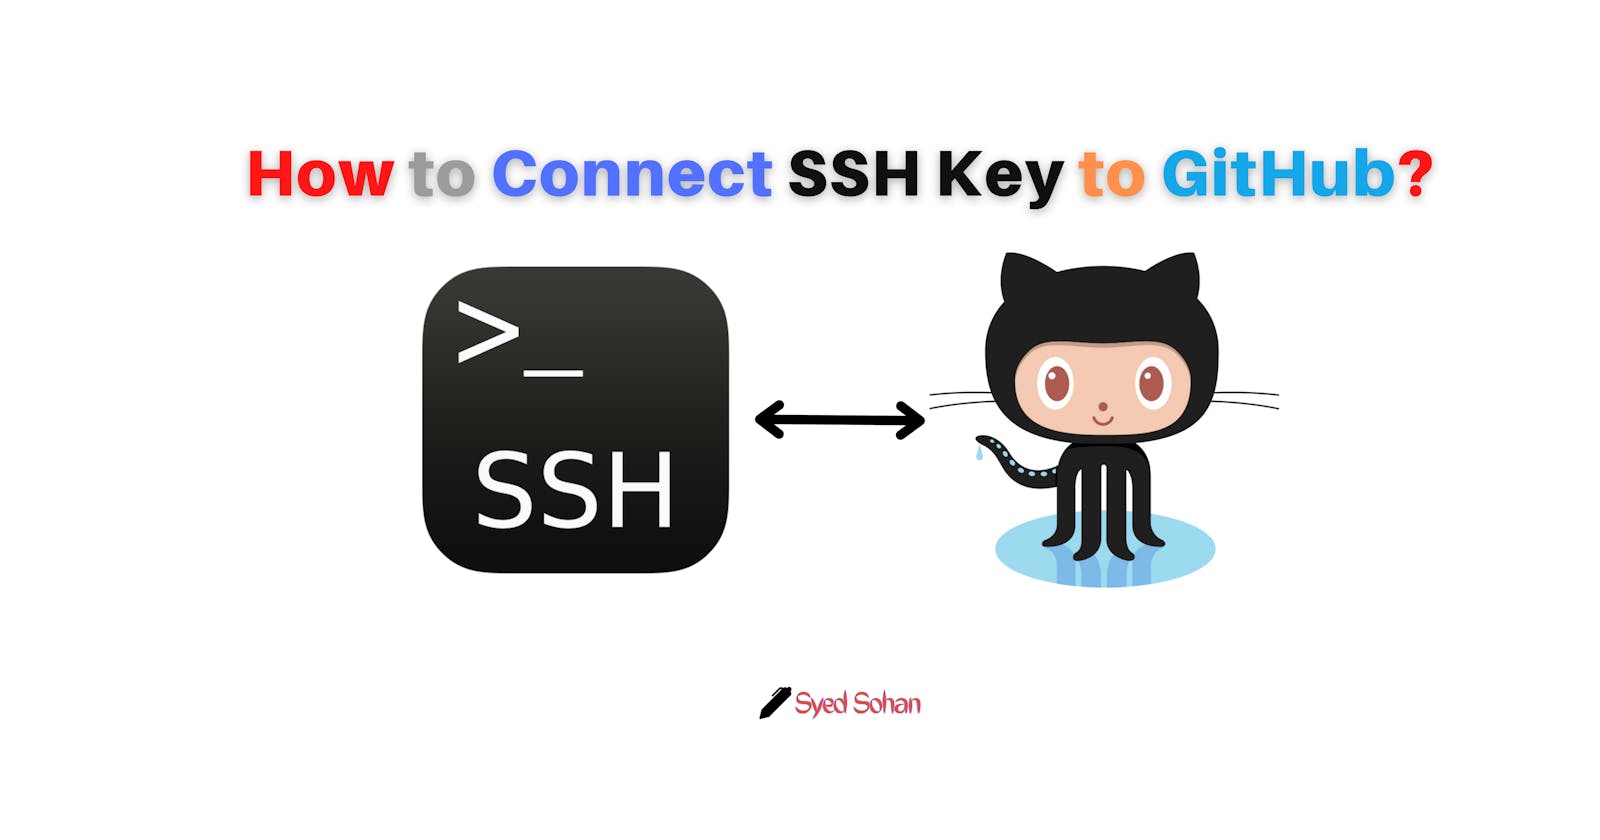 How to Connect SSH Key to GitHub?